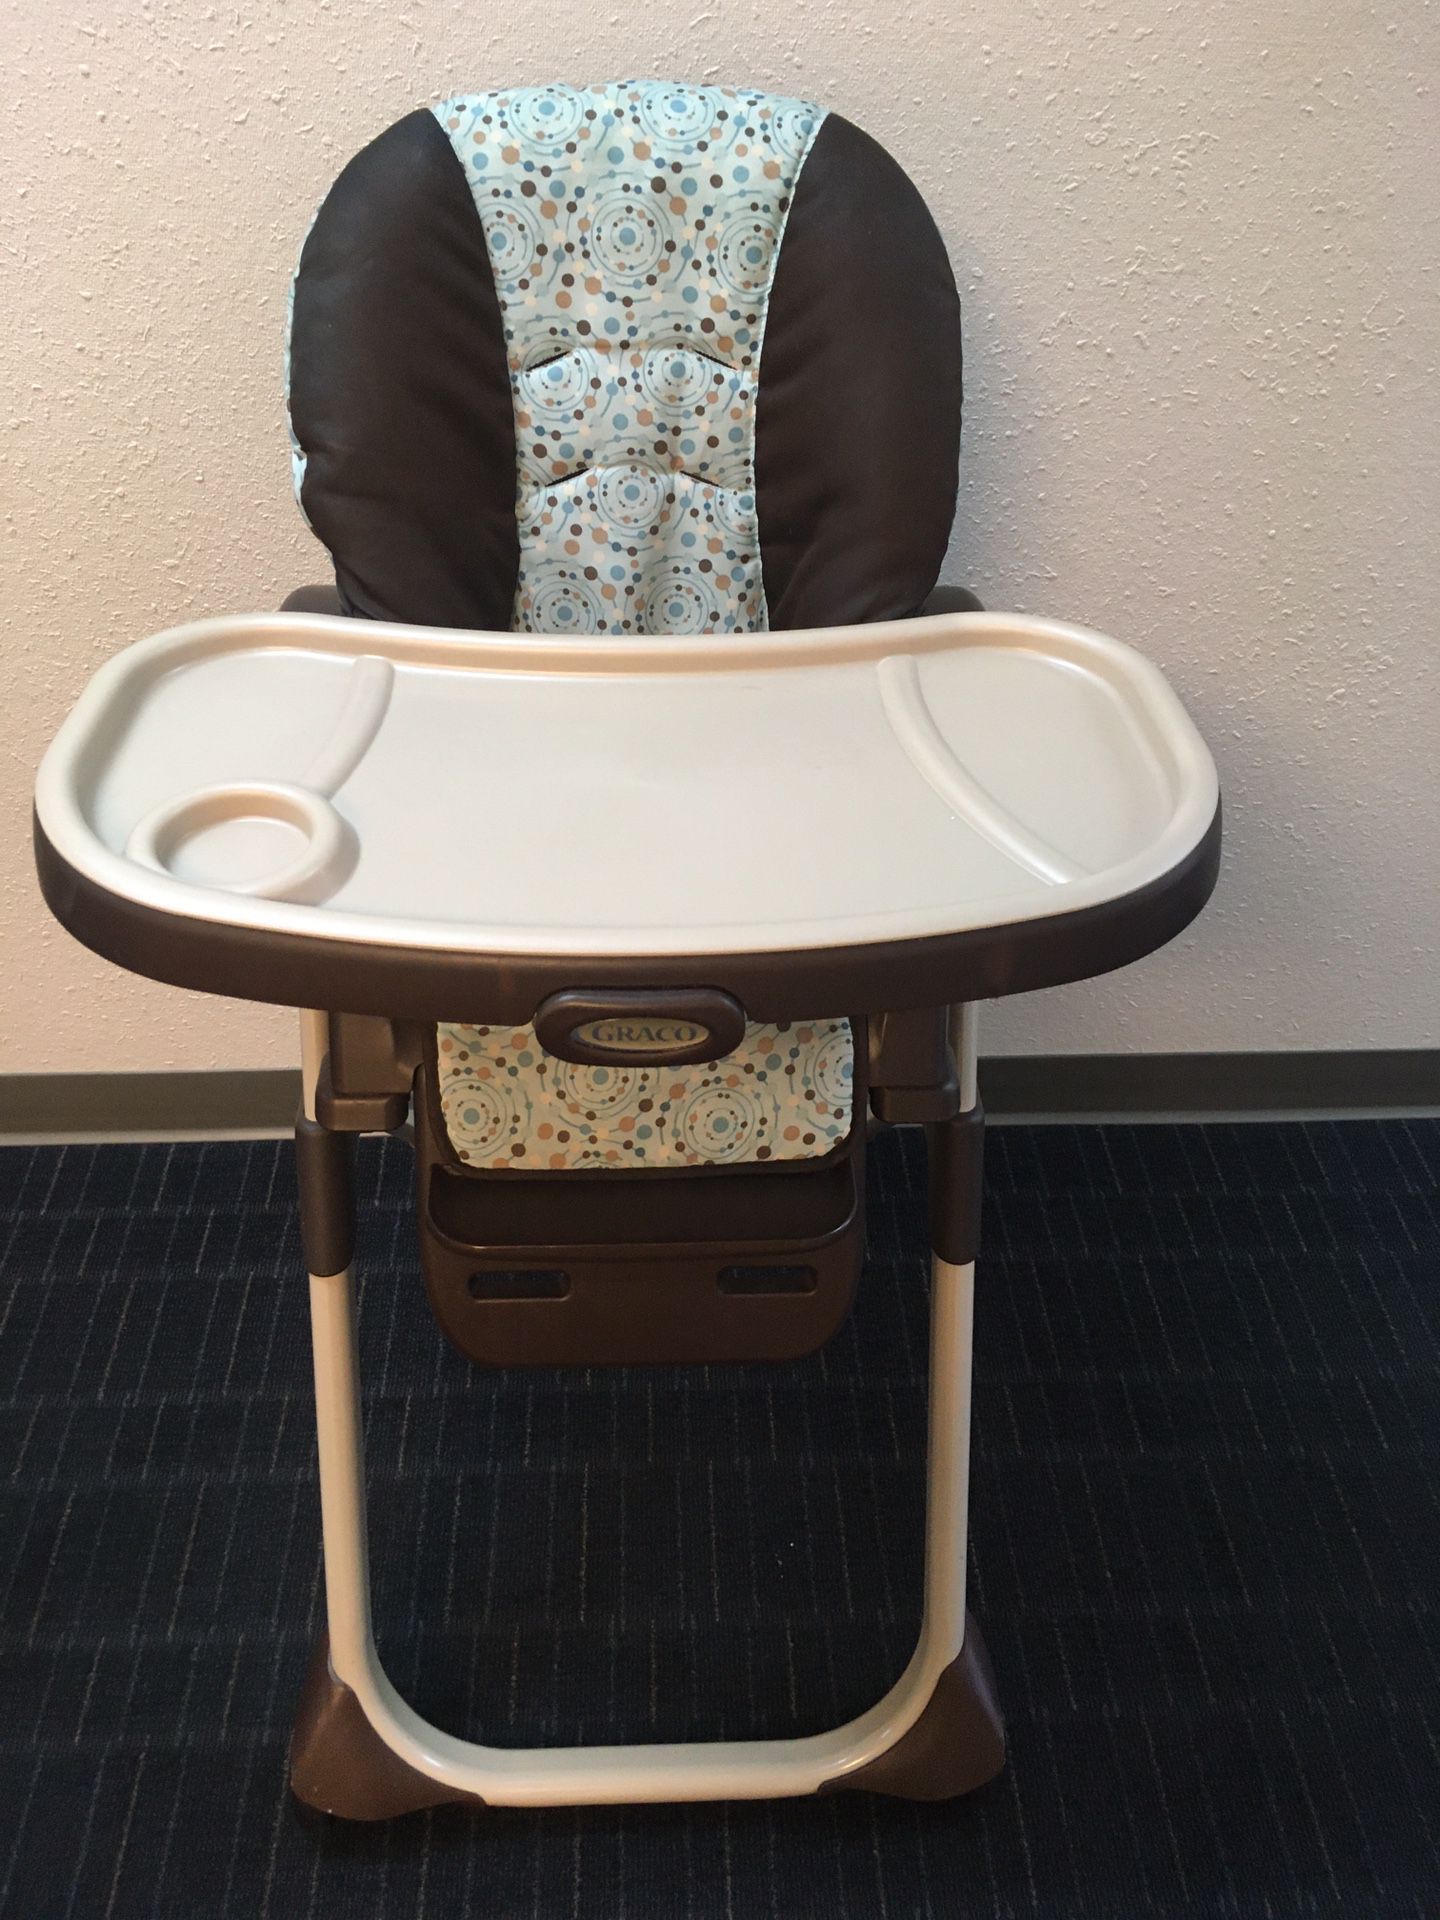 Graco baby toddler highchair